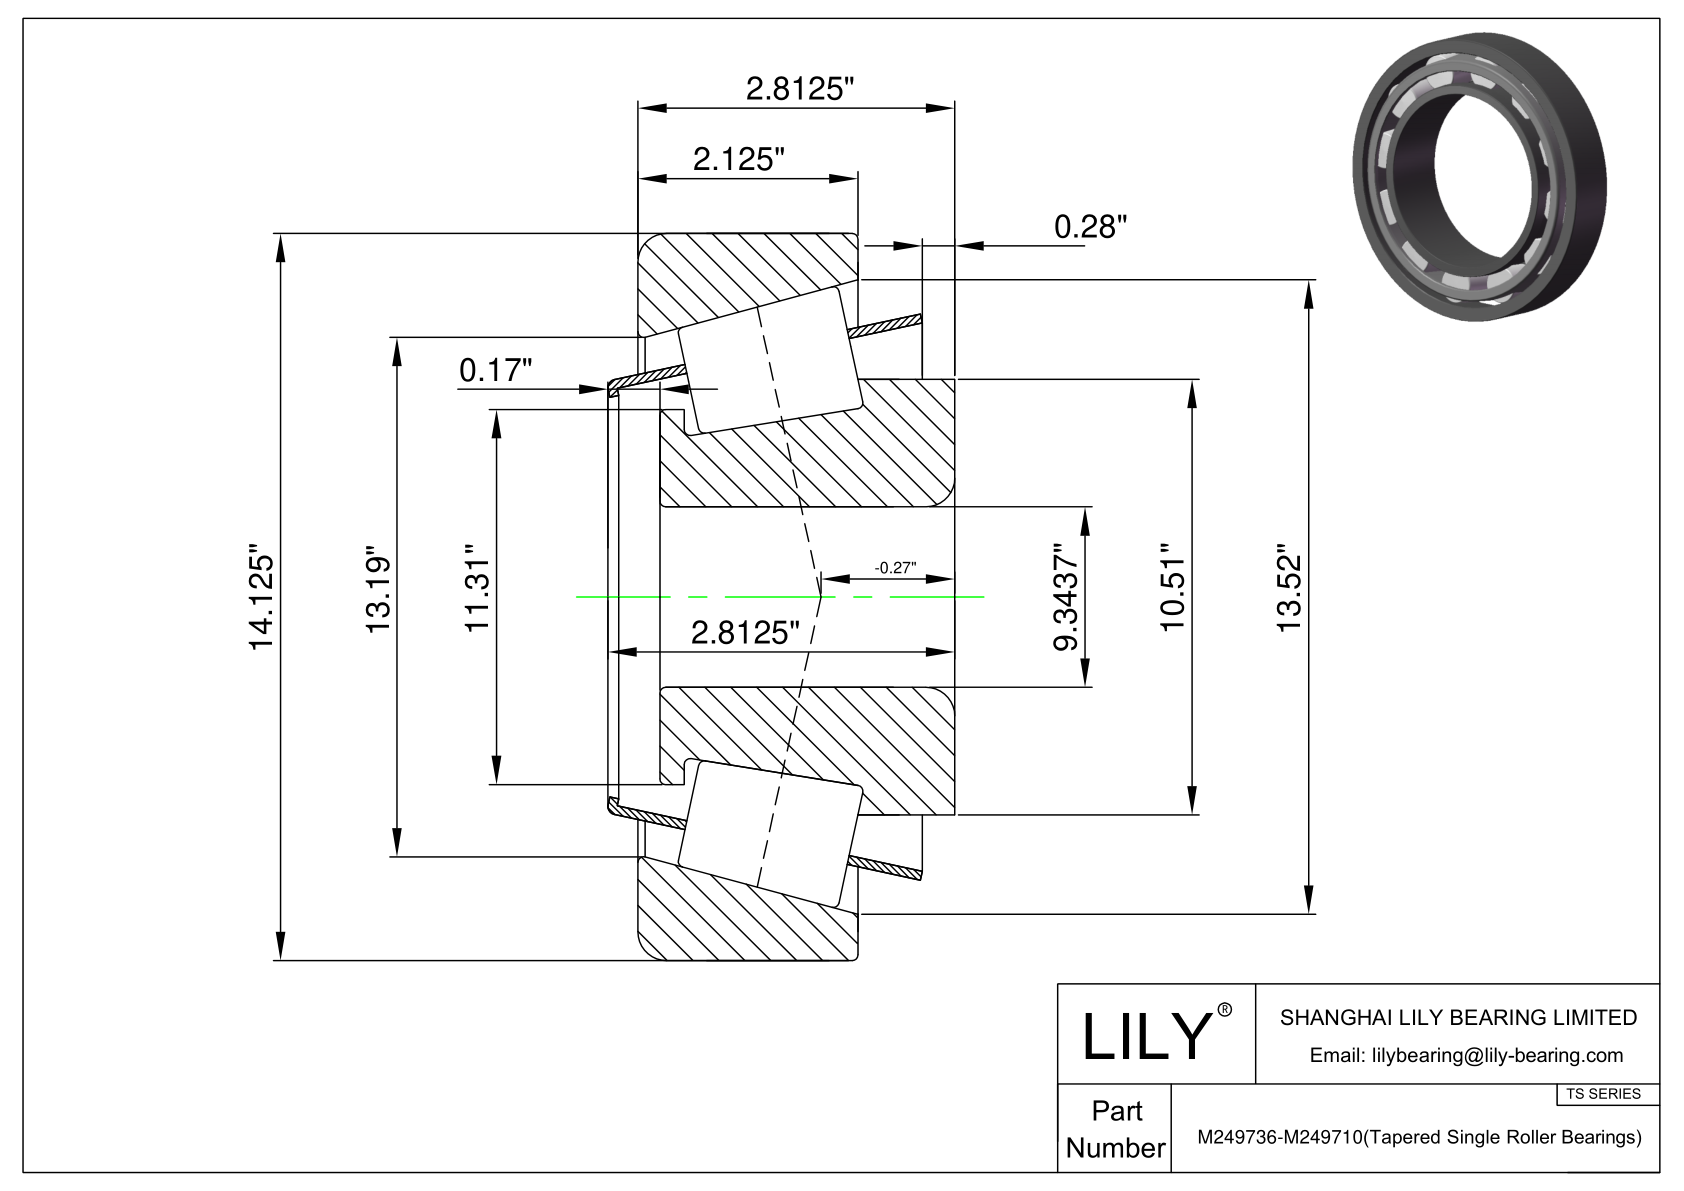 M249736-M249710 TS (Tapered Single Roller Bearings) (Imperial) cad drawing